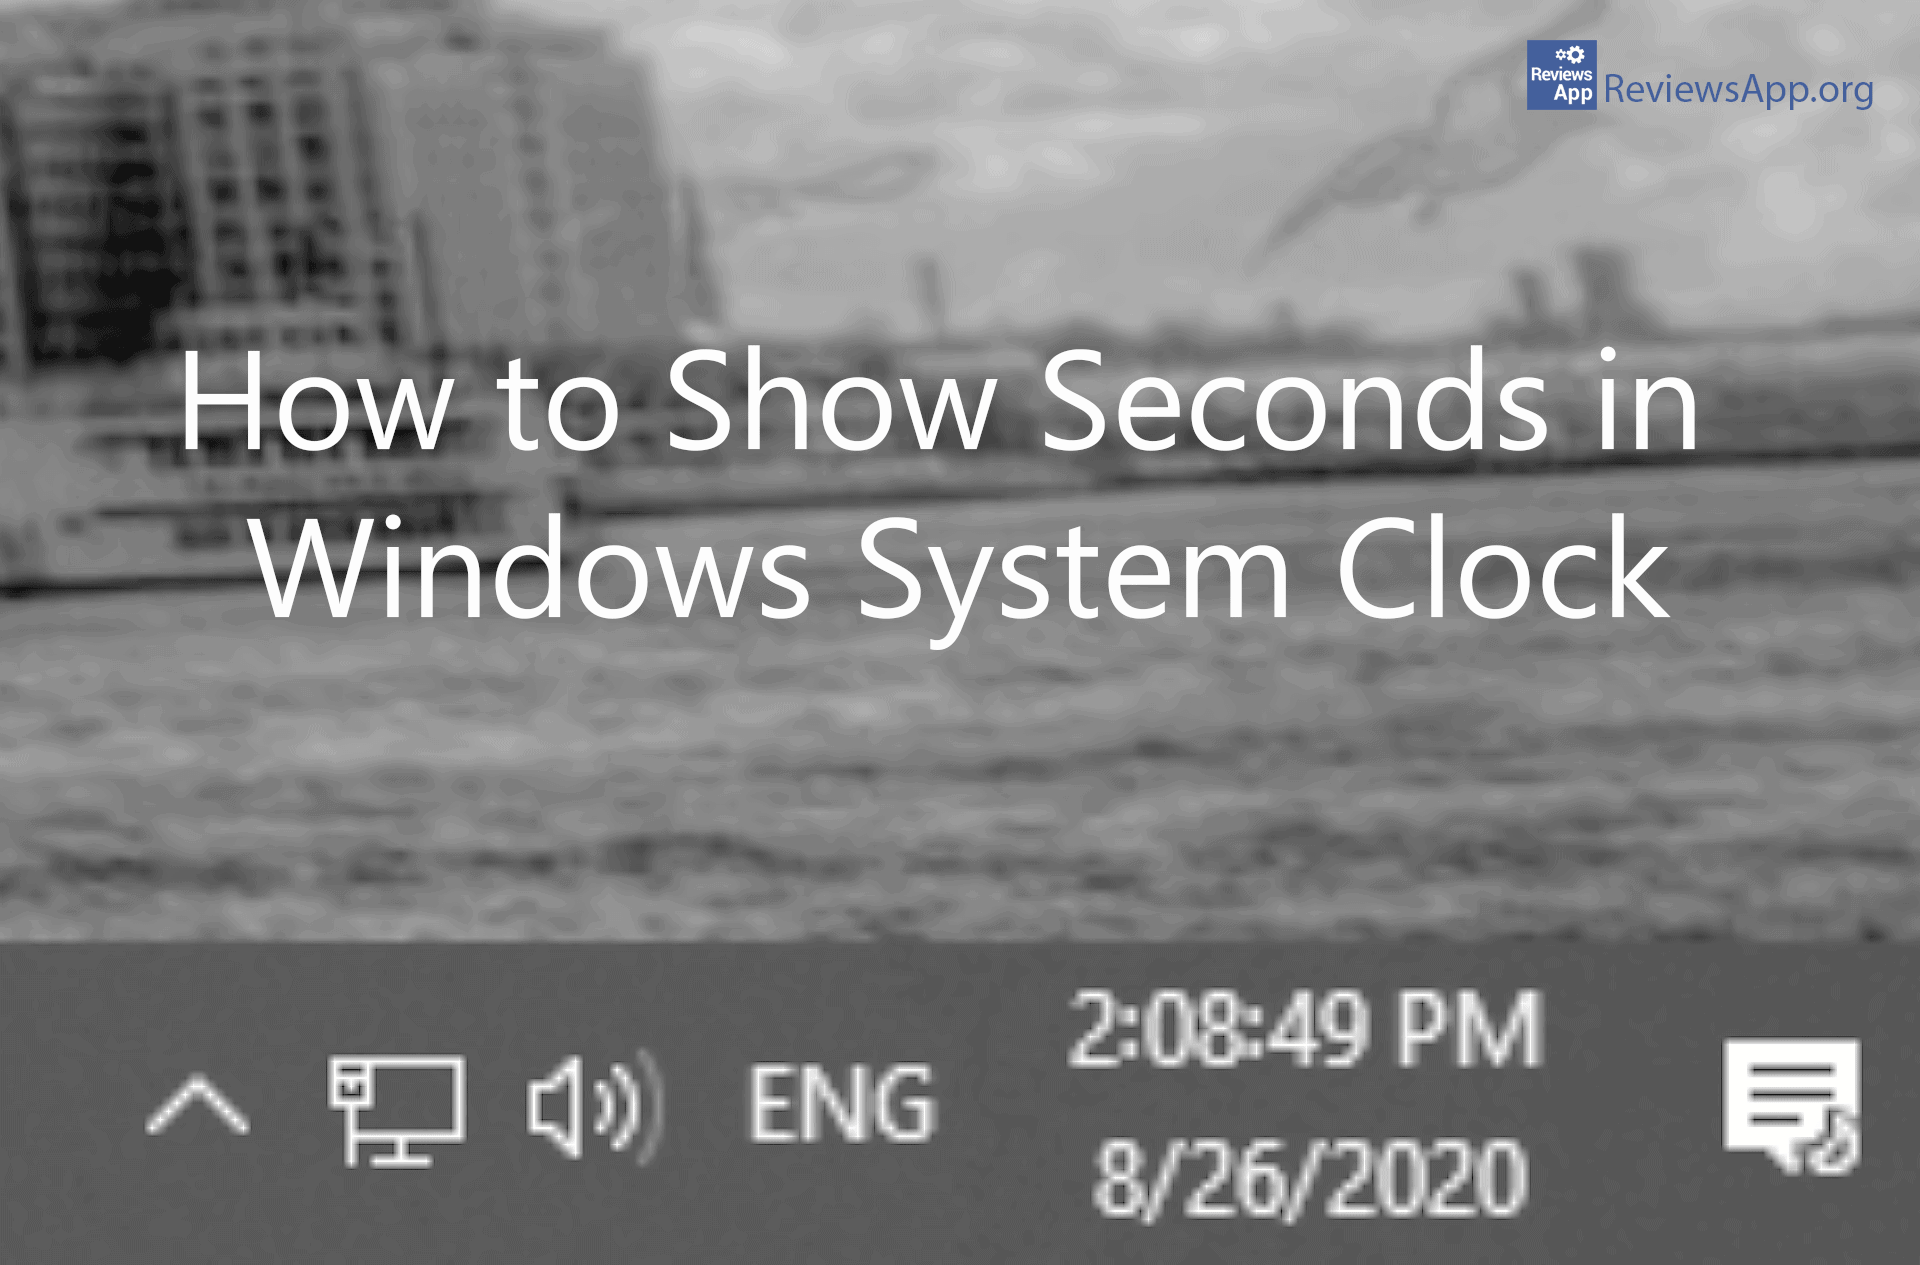 How to show seconds on system clock in Windows 10